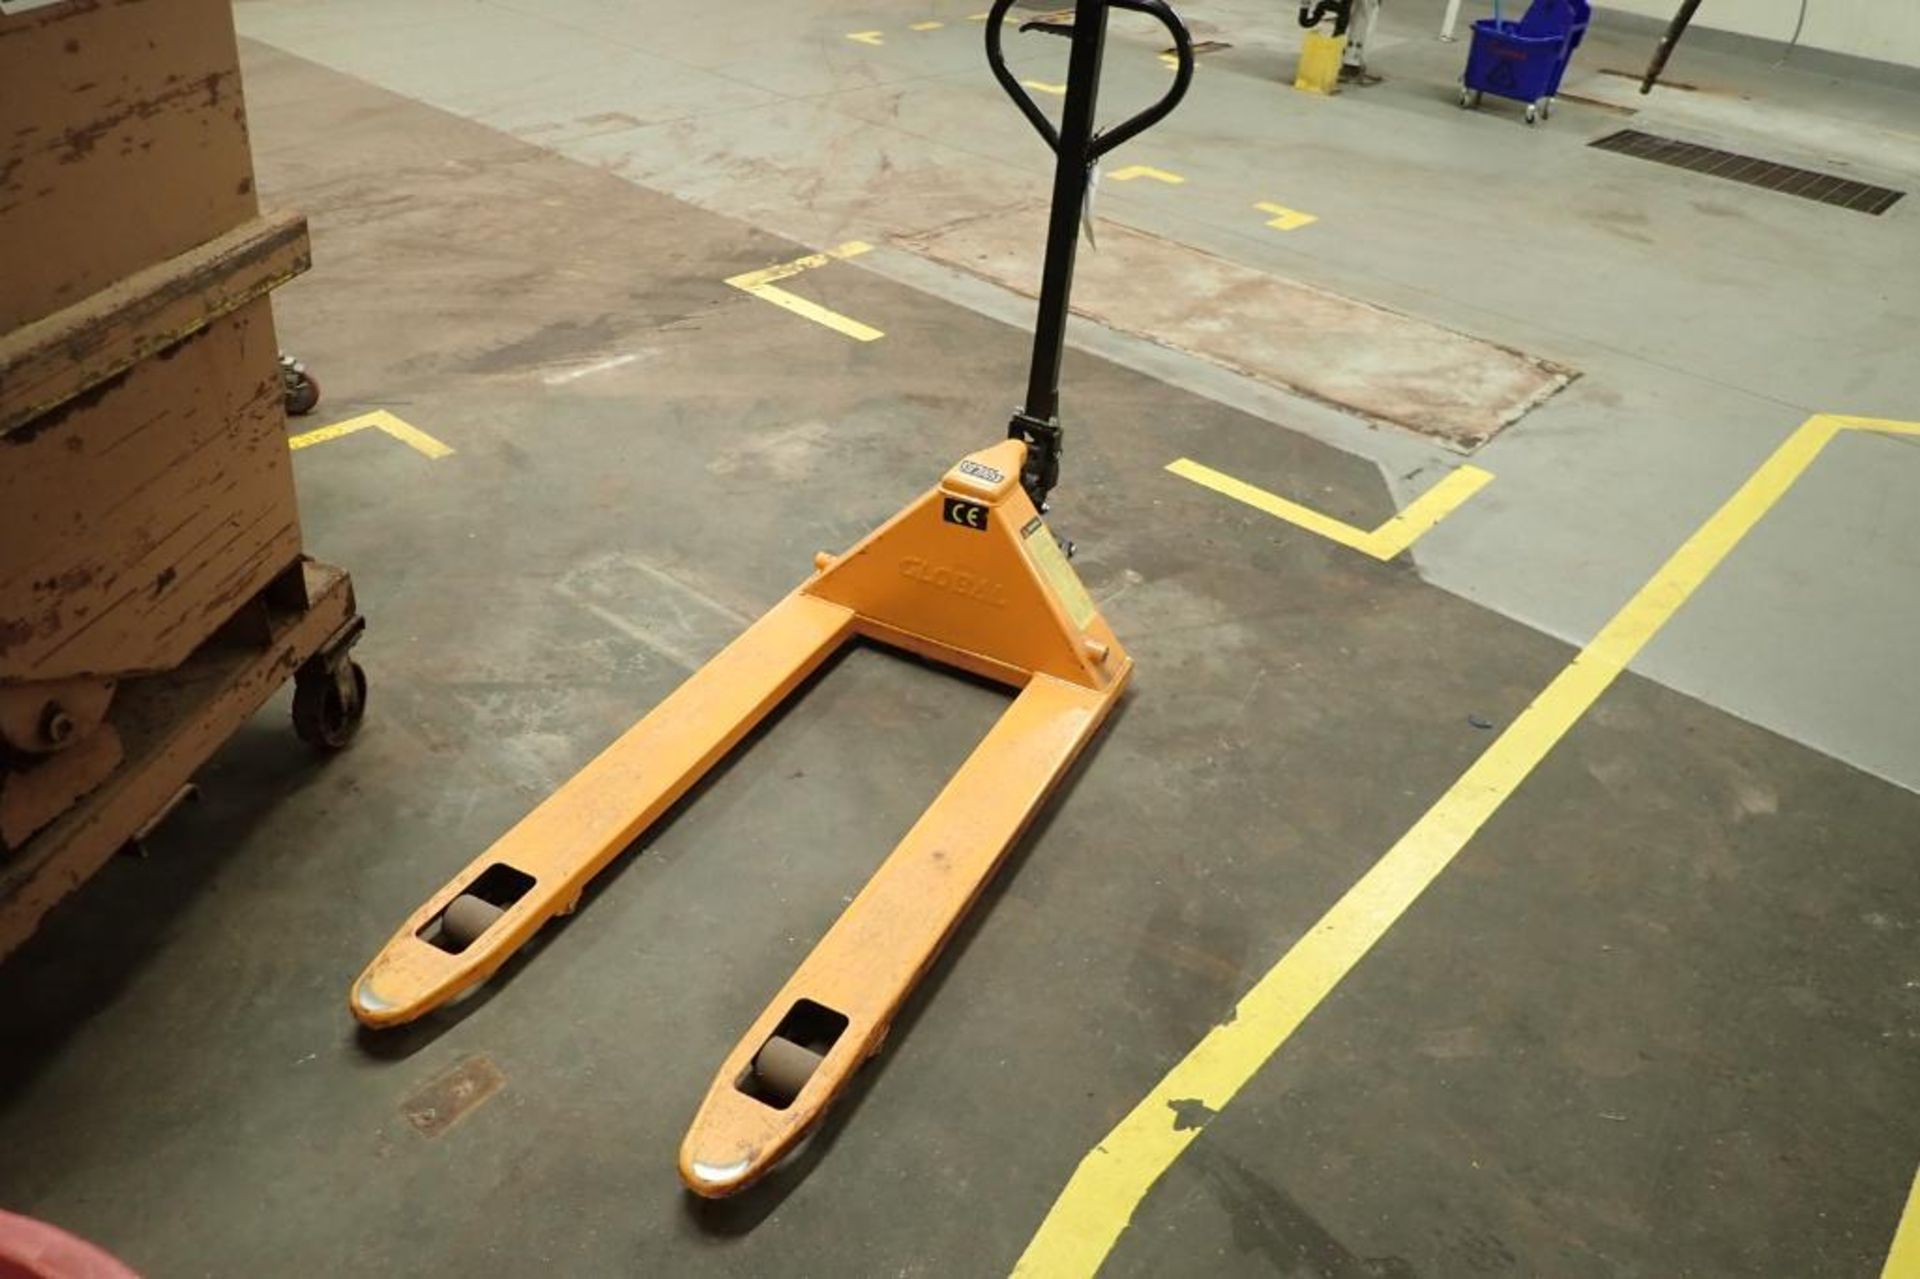 Global Industrial 5500 lb hand pallet jack, SN F684191, yellow. **Rigging Fee: $10**